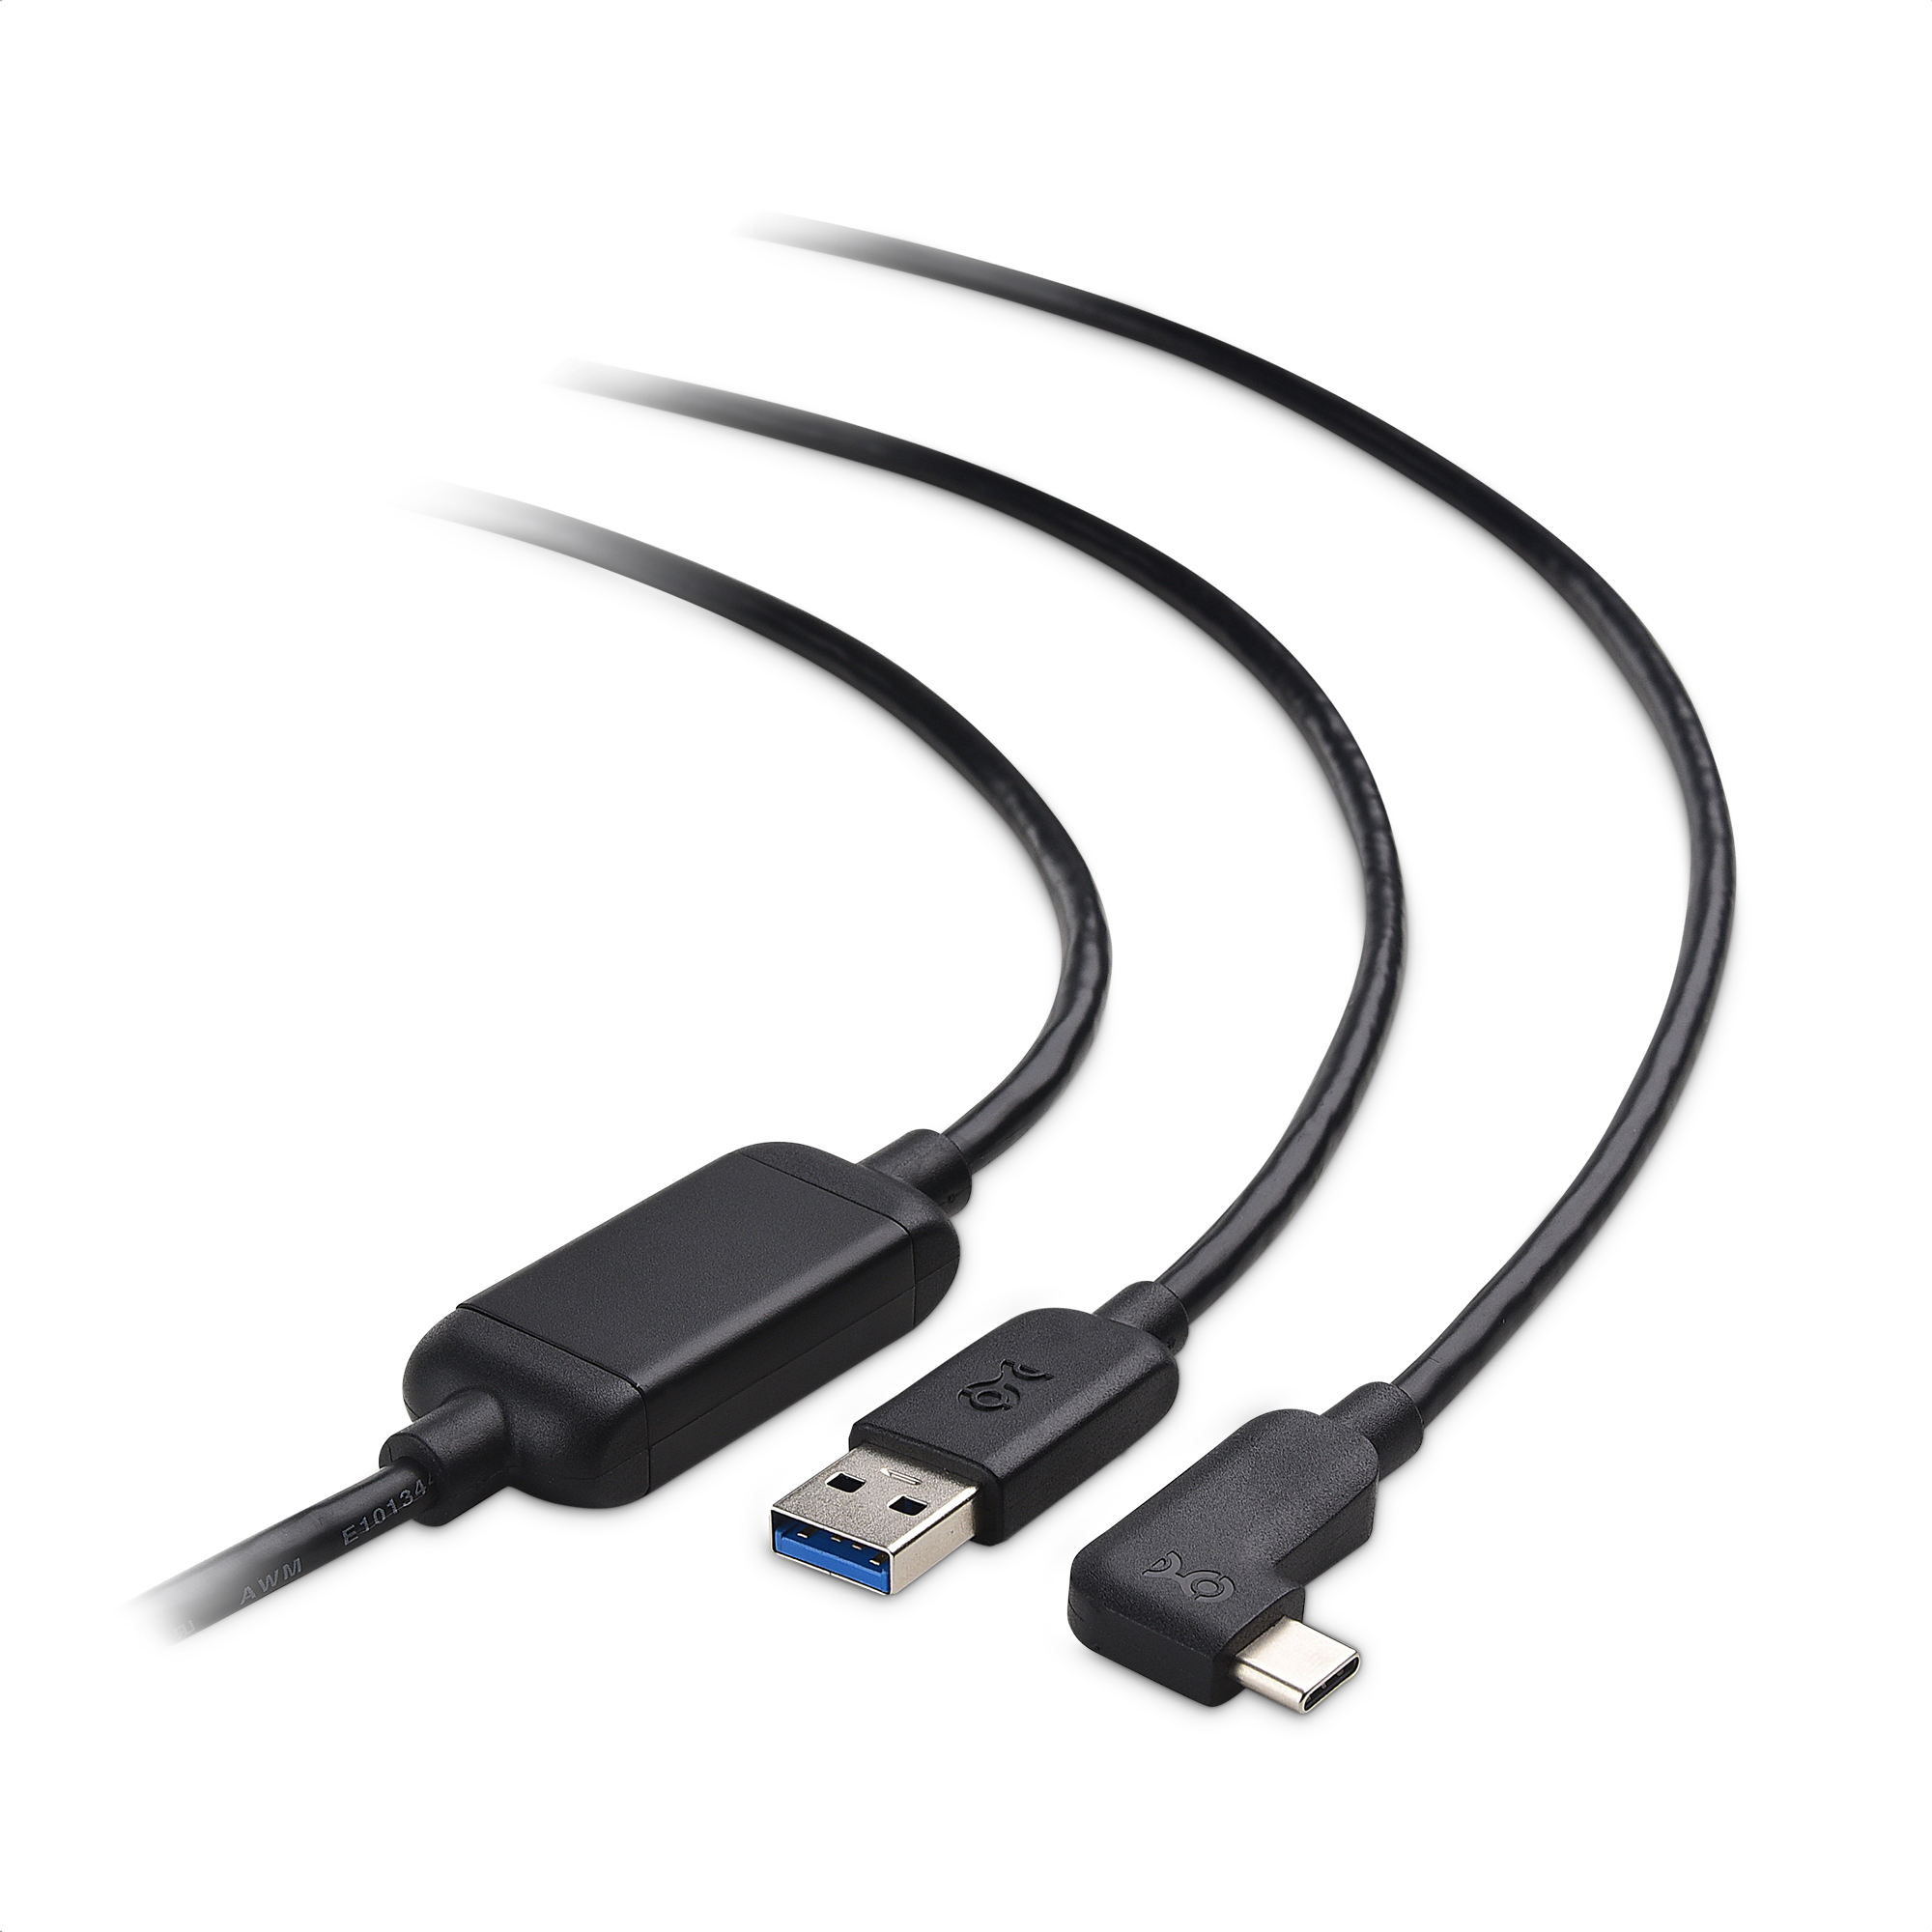 How Long Can a USB-C Cable Be?